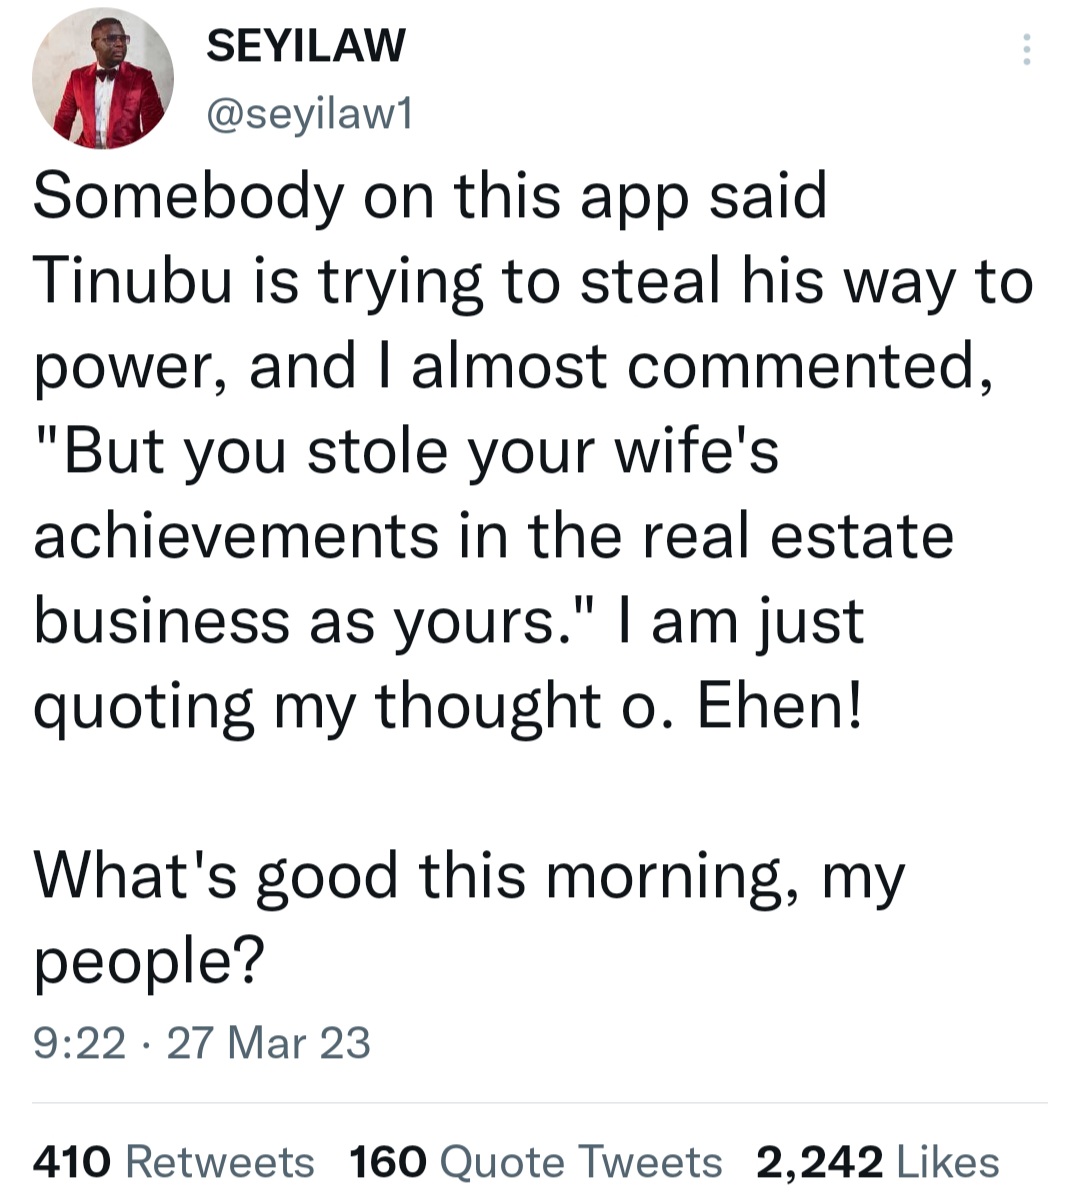 Twitter User Slams Seyi Law After The Comedian Shamed A Man For Claiming His Wife’s Achievement